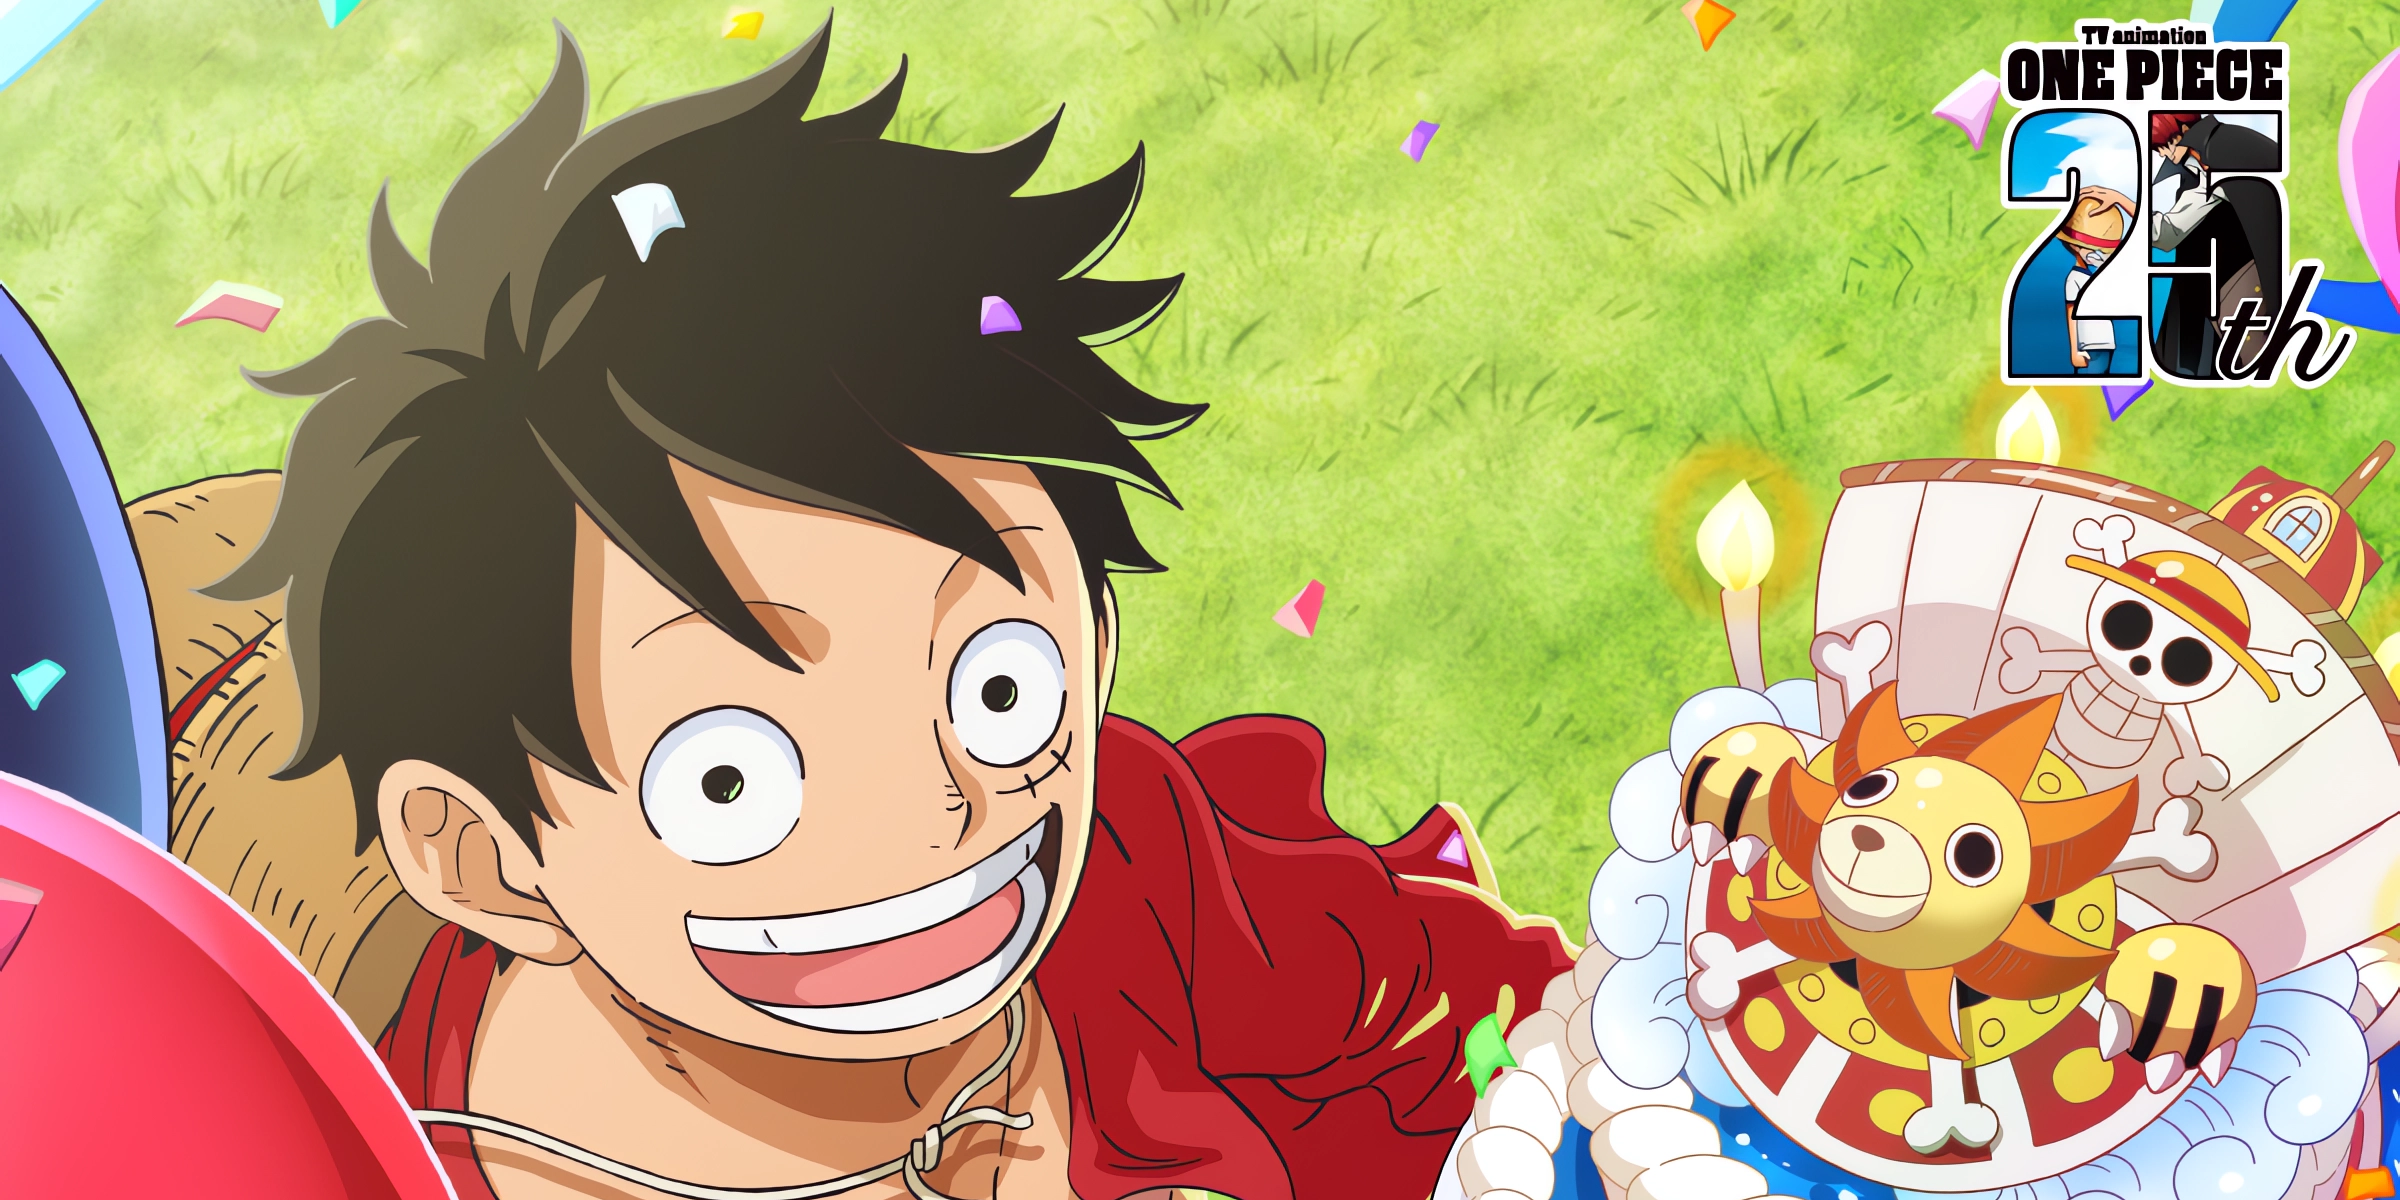 Luffy's birthday and Toei Animation's One Piece 25th anniversary